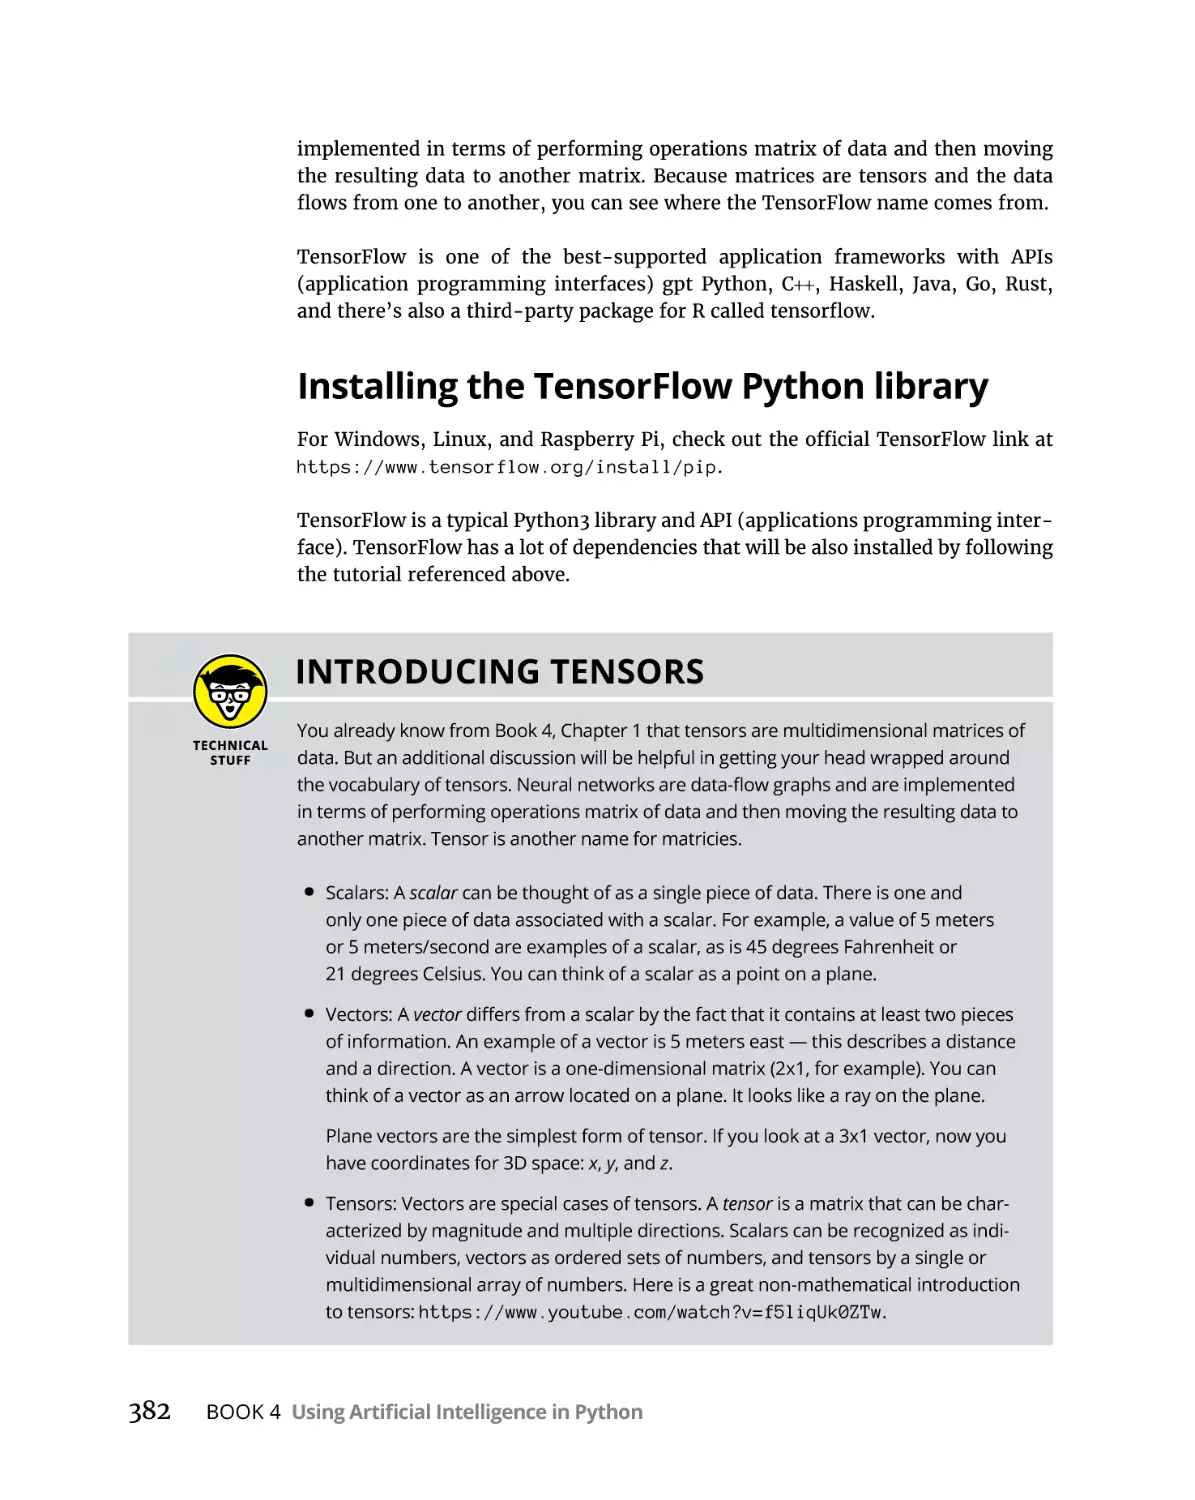 Installing the TensorFlow Python library